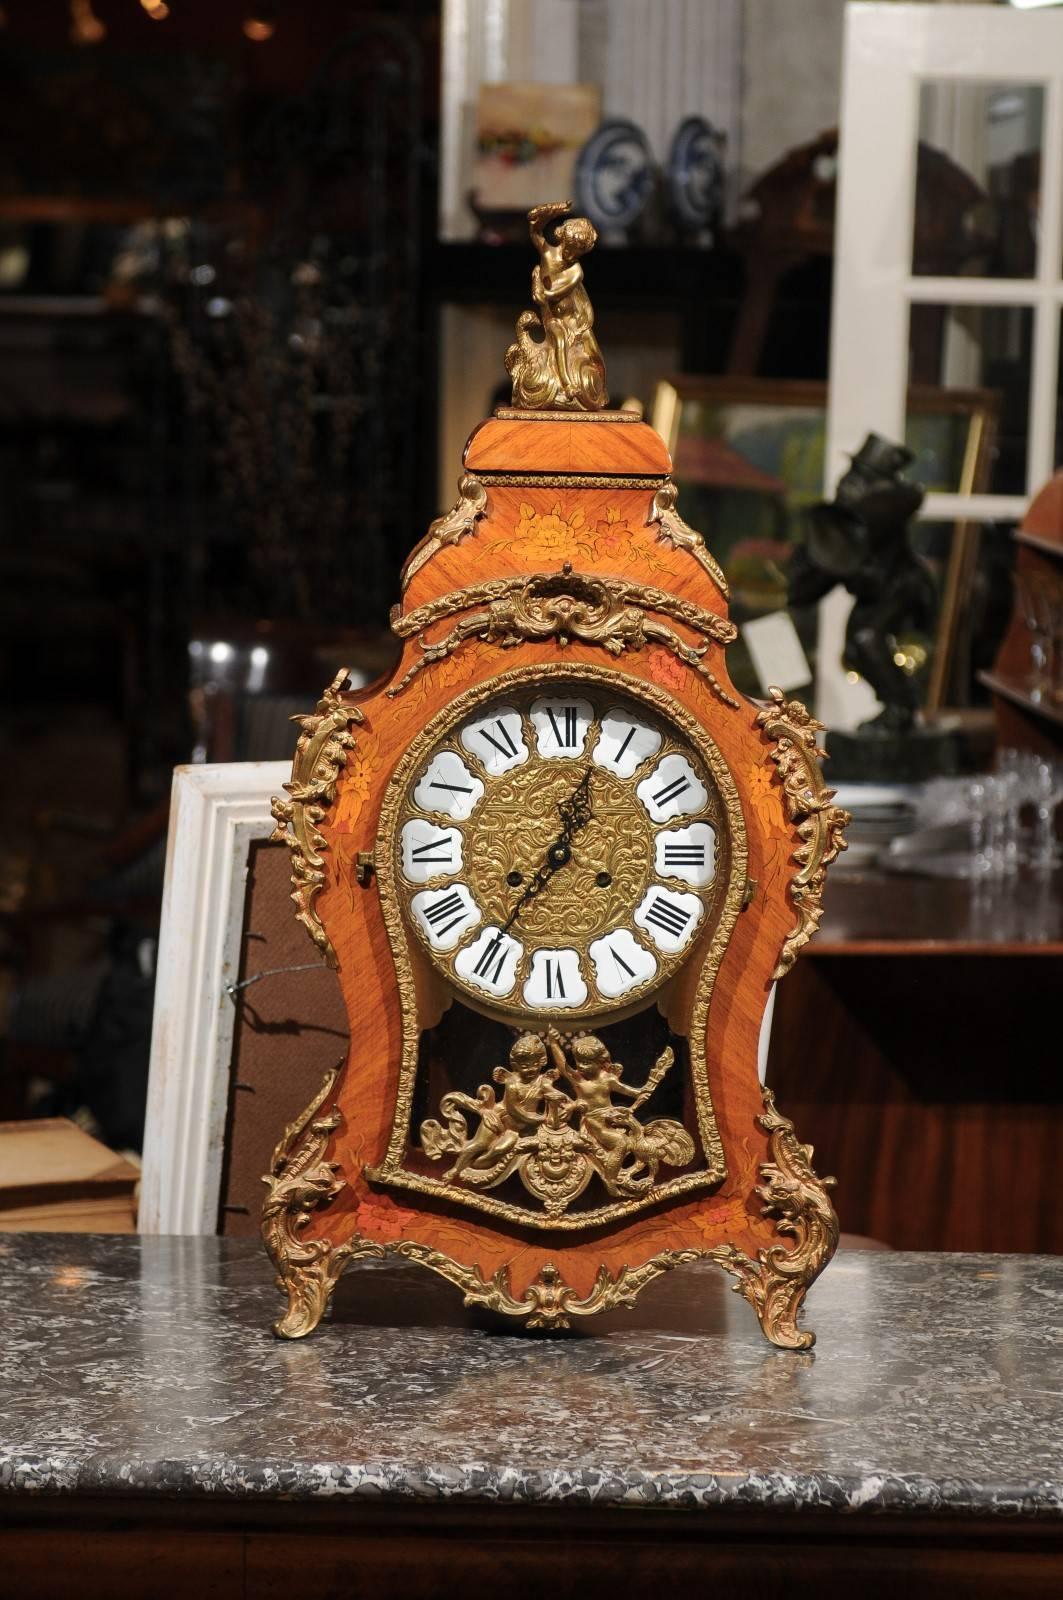 A beautiful ornate French Louis XV marquetry kingswood mantle clock with a bronze cherub on top and bronze mounts throughout. It is in working condition and chimes every hour.